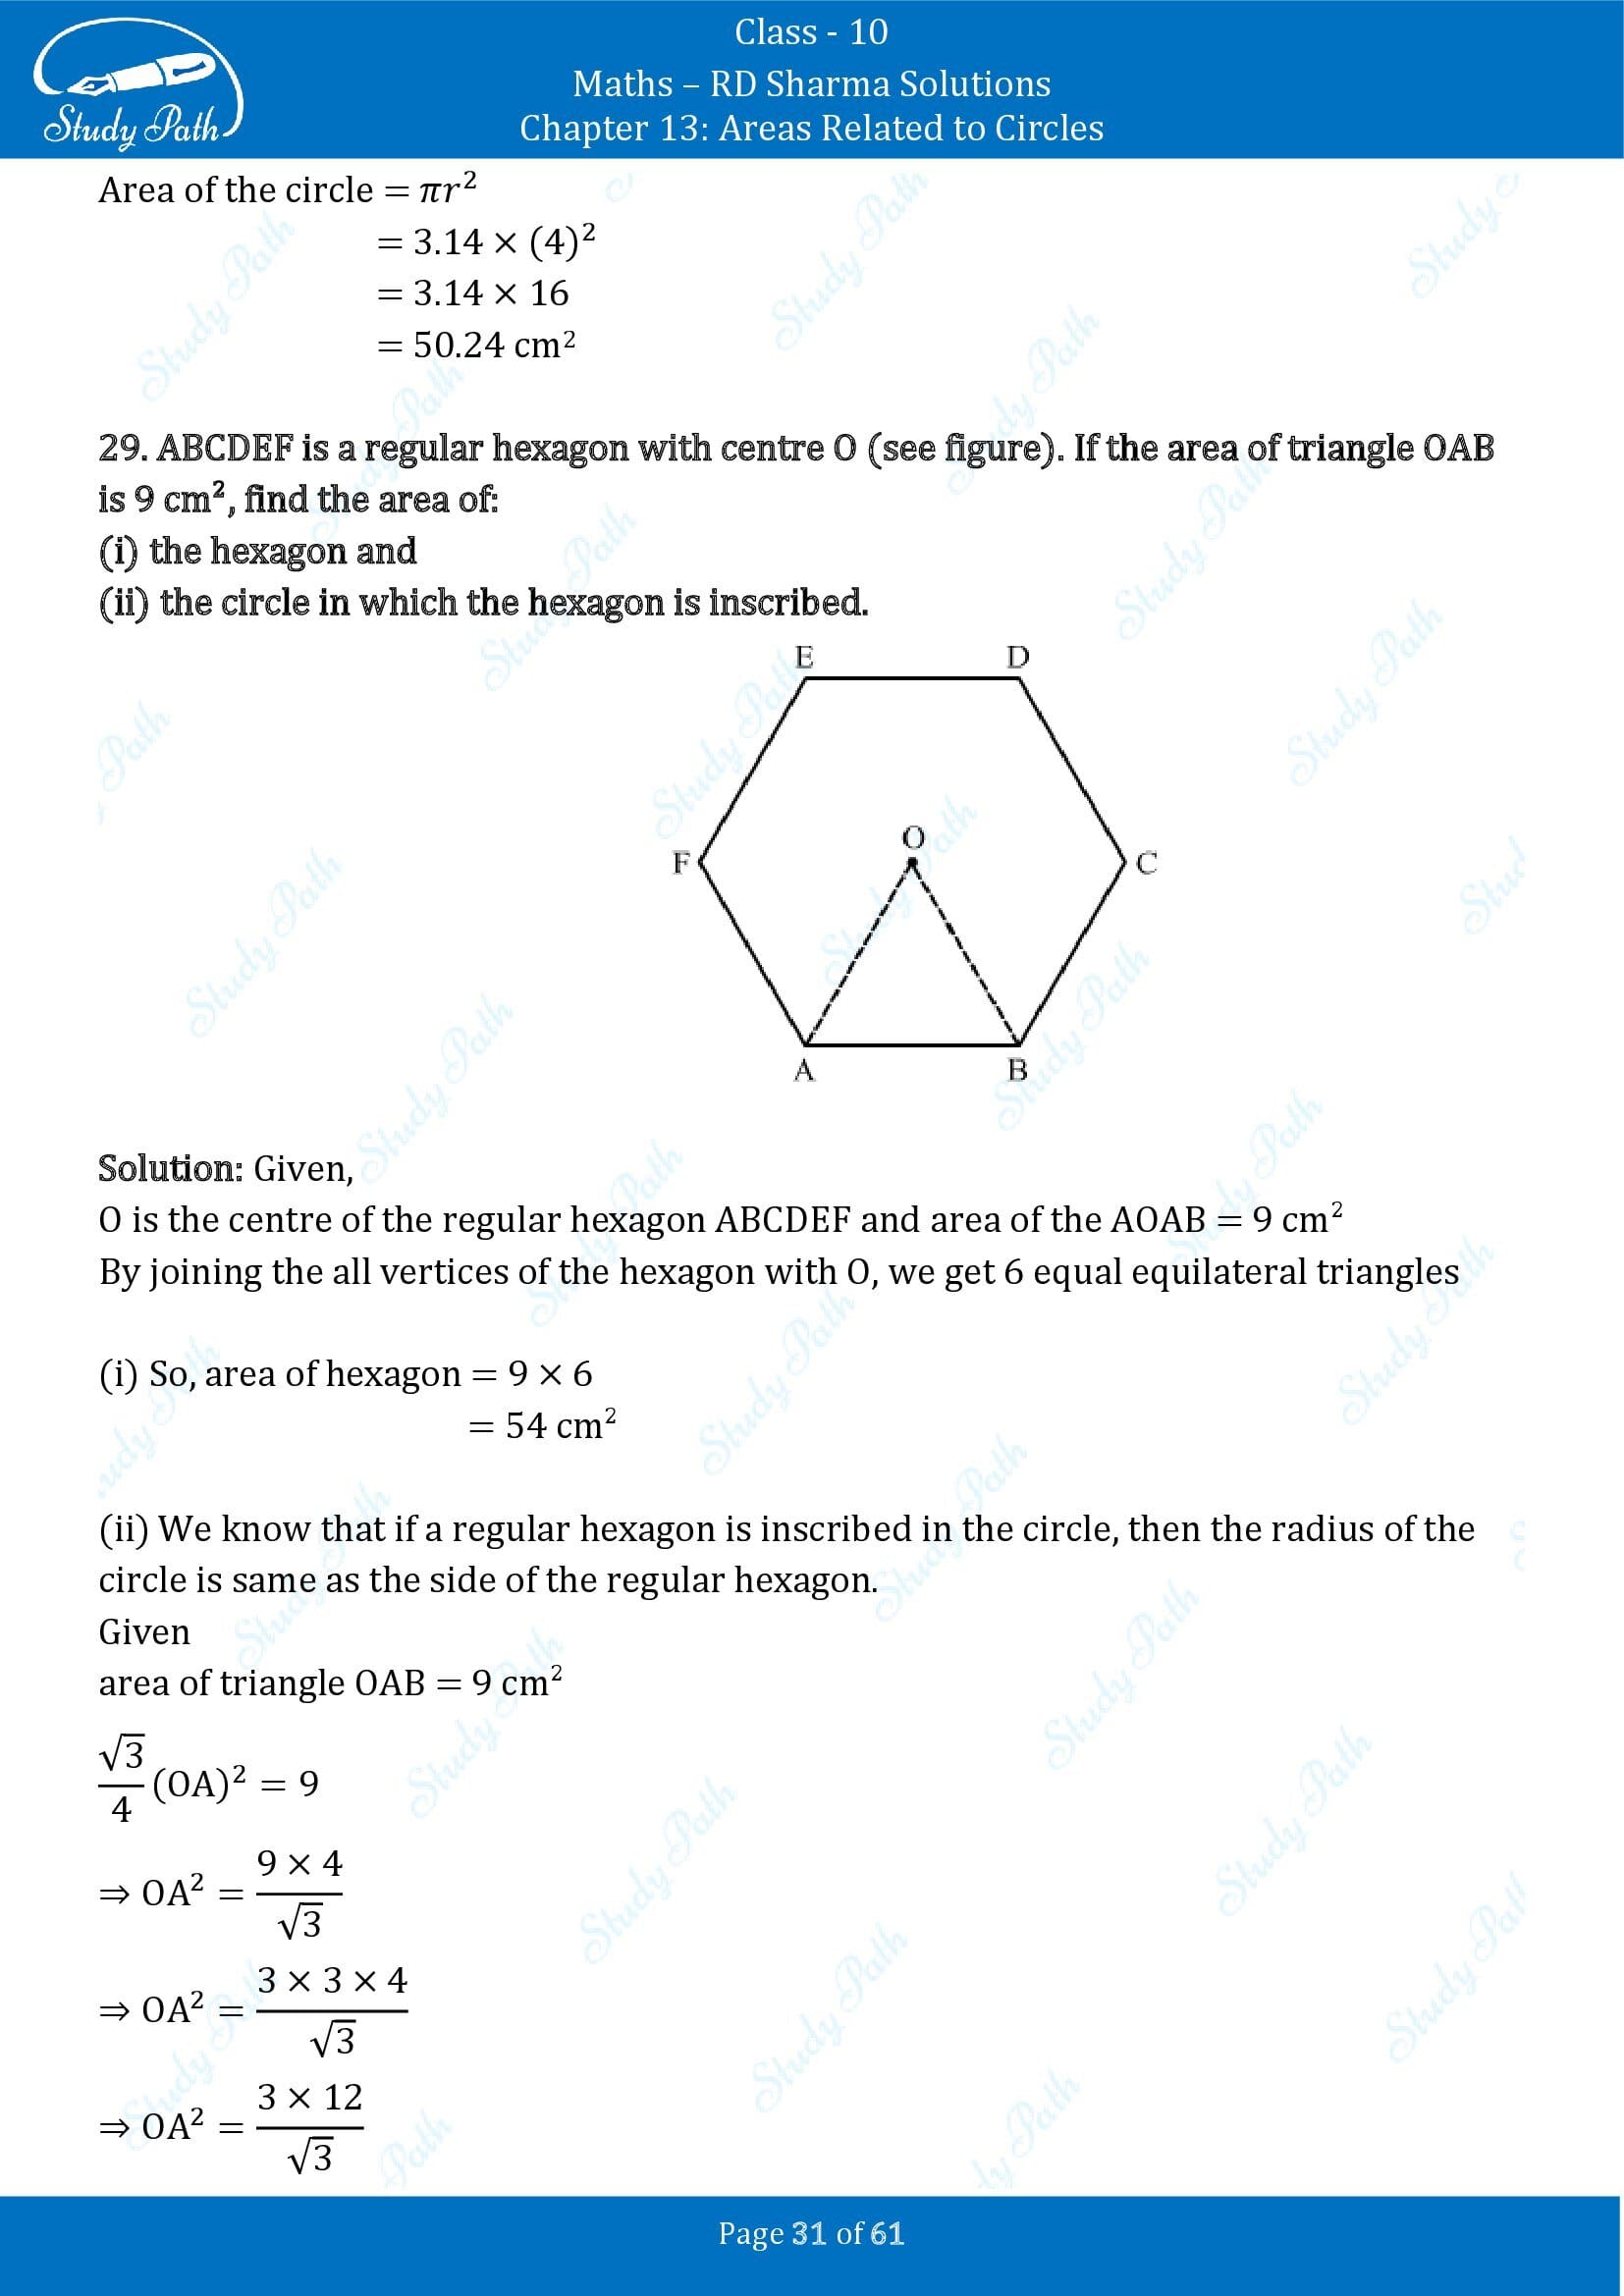 RD Sharma Solutions Class 10 Chapter 13 Areas Related to Circles Exercise 13.4 00031